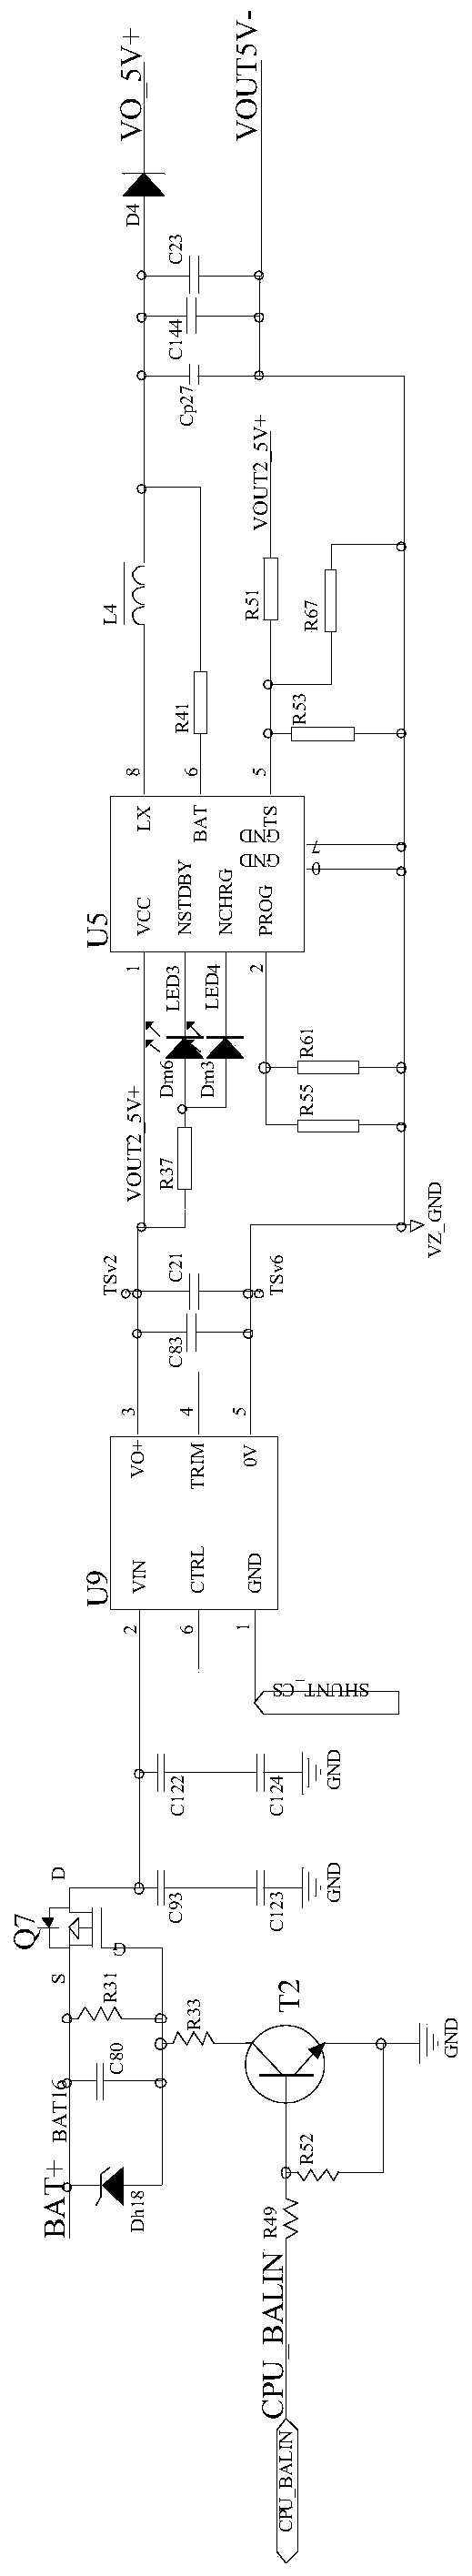 Active equalization circuit suitable for 16-string battery pack